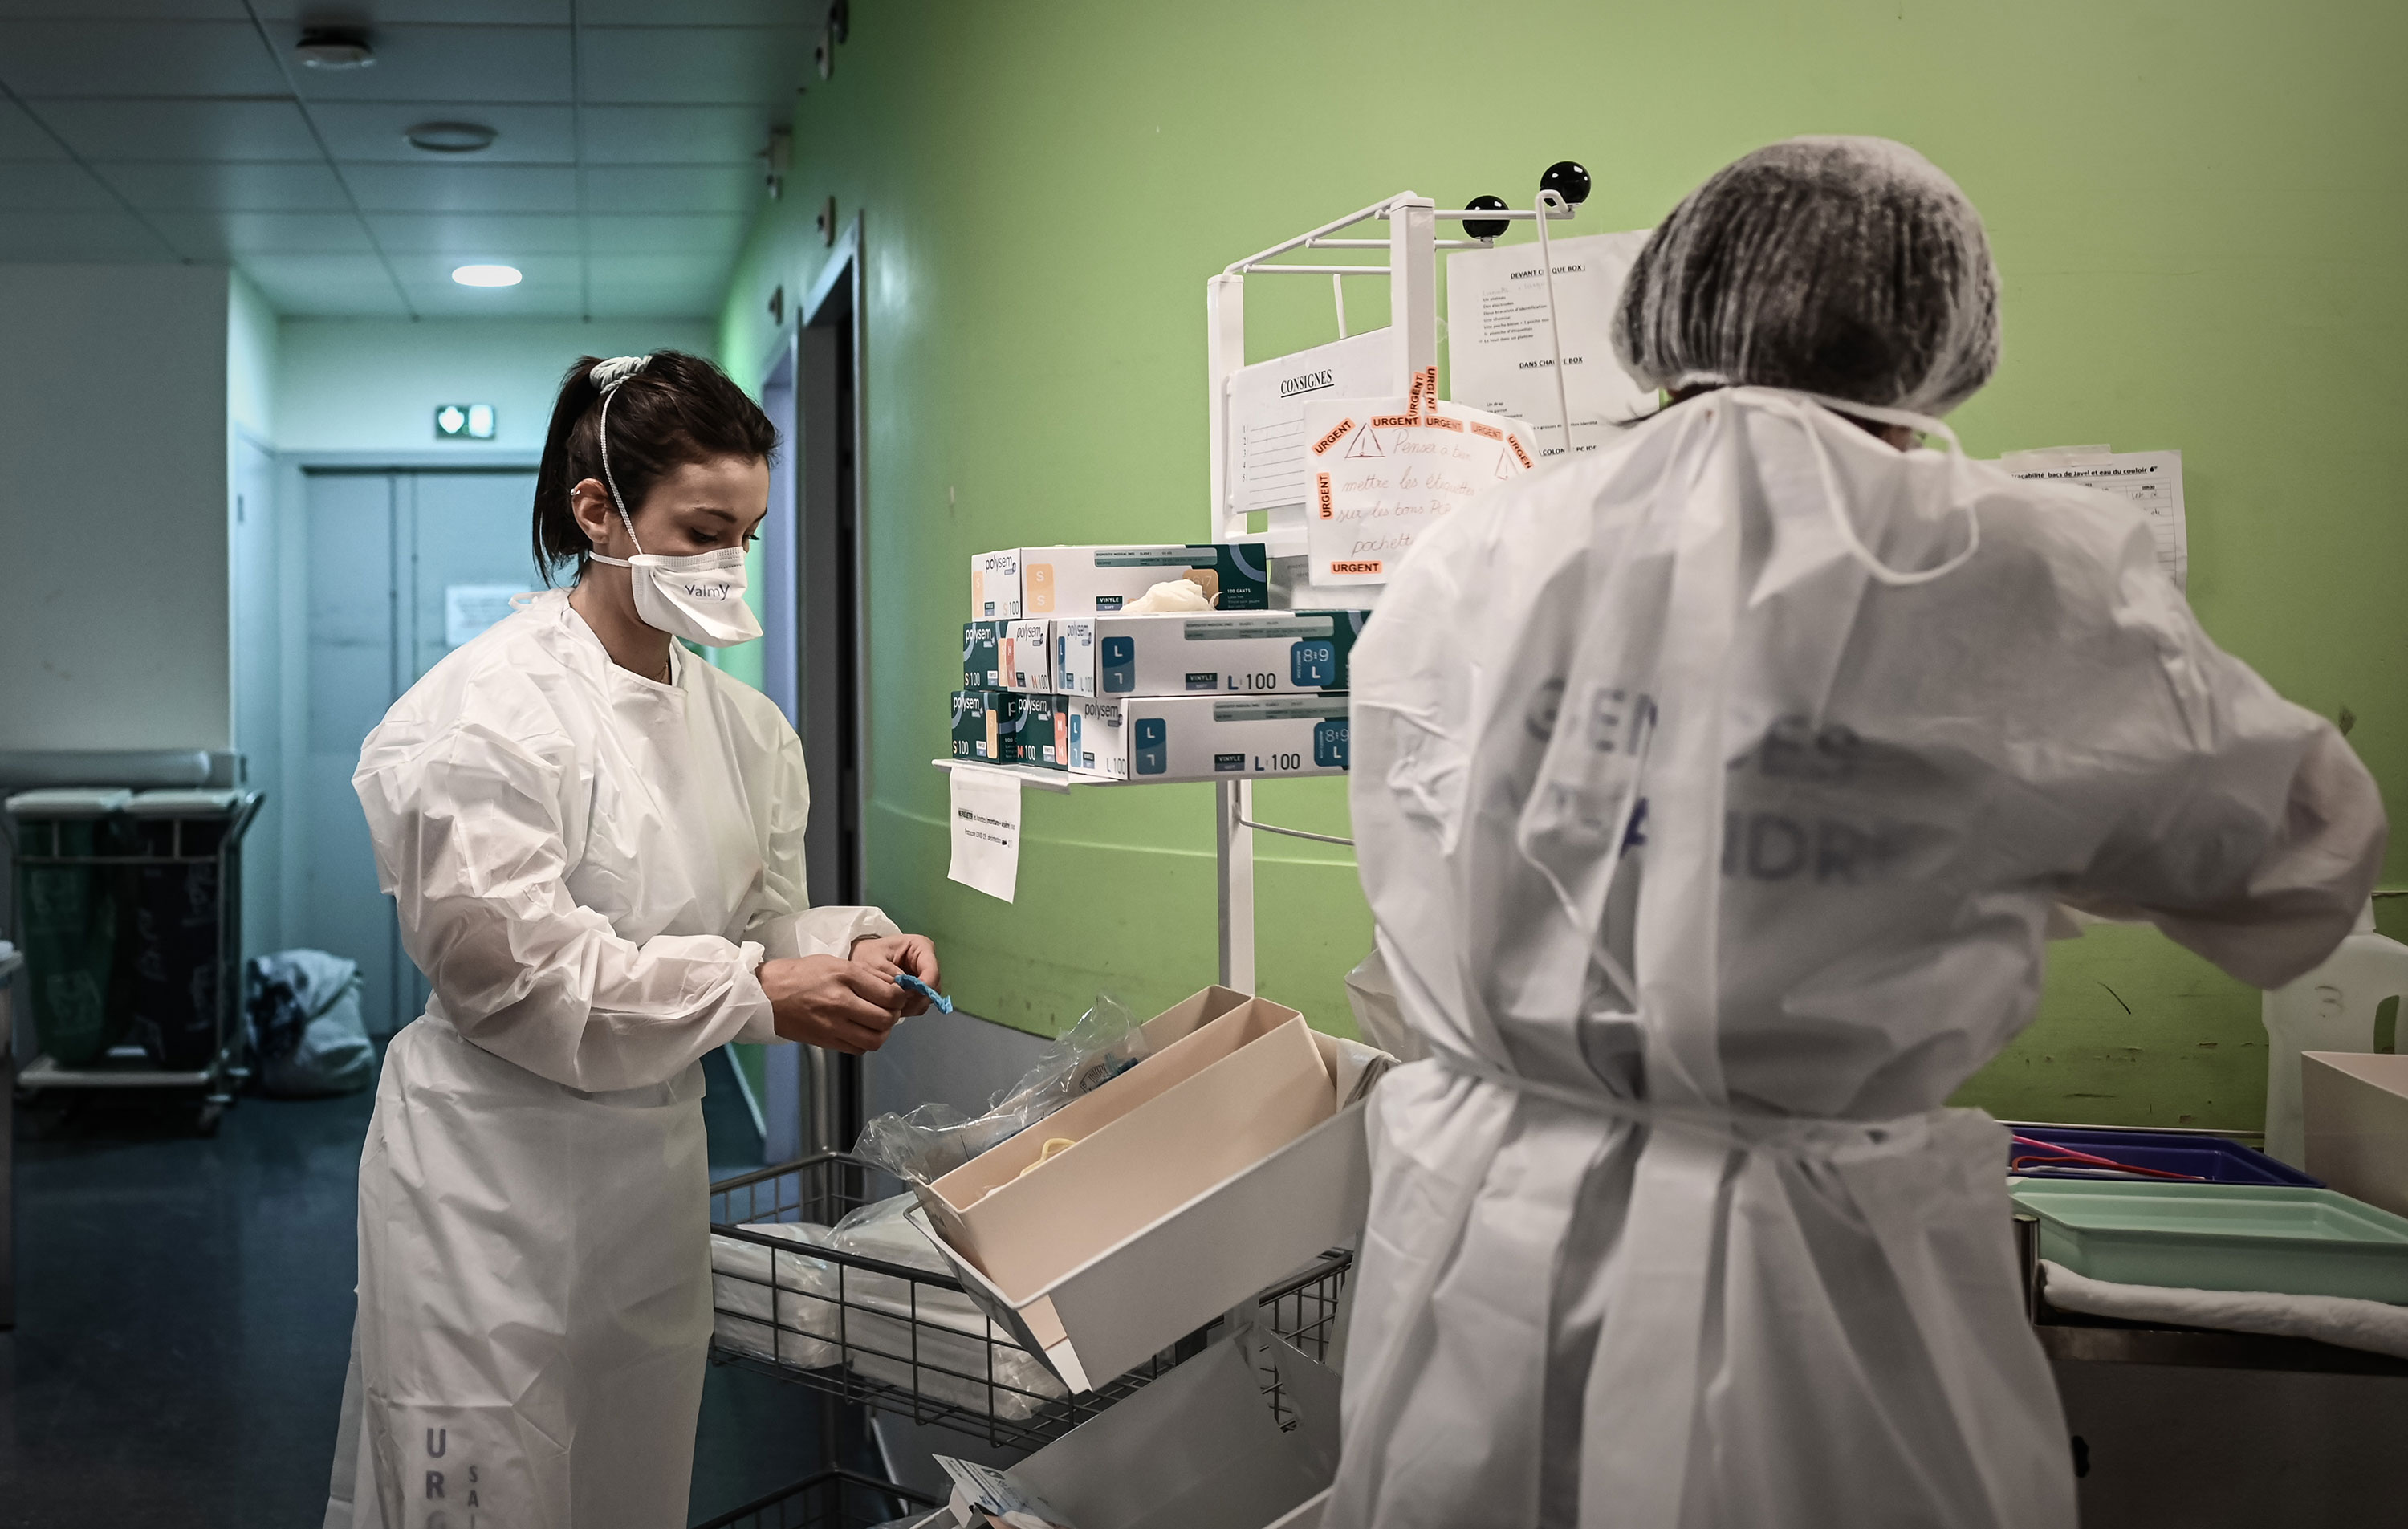 Medical personnel work at Saint-Andre hospital, where new rapid-result Covid-19 antigen tests will be conducted, in Bordeaux, France, on October 20.